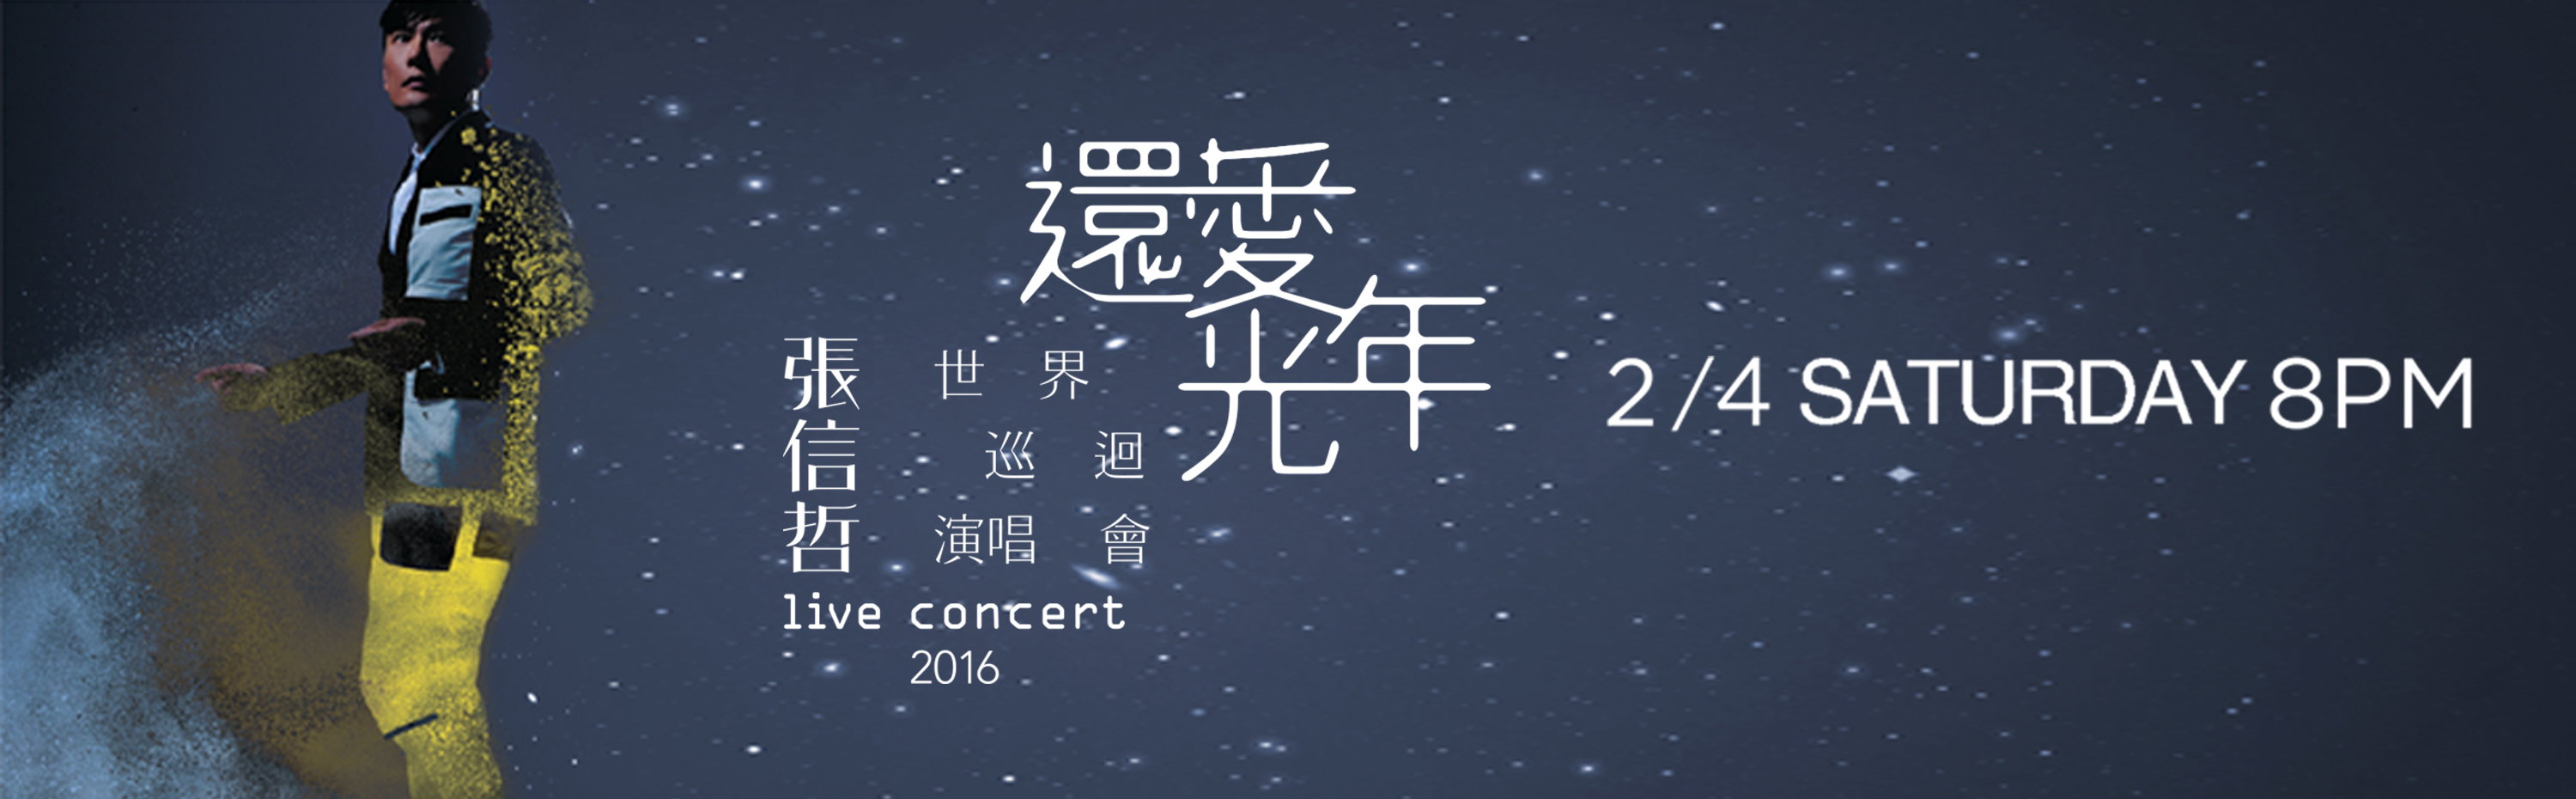 2016 Jeff · Love · Light Year Live Concert in Macao